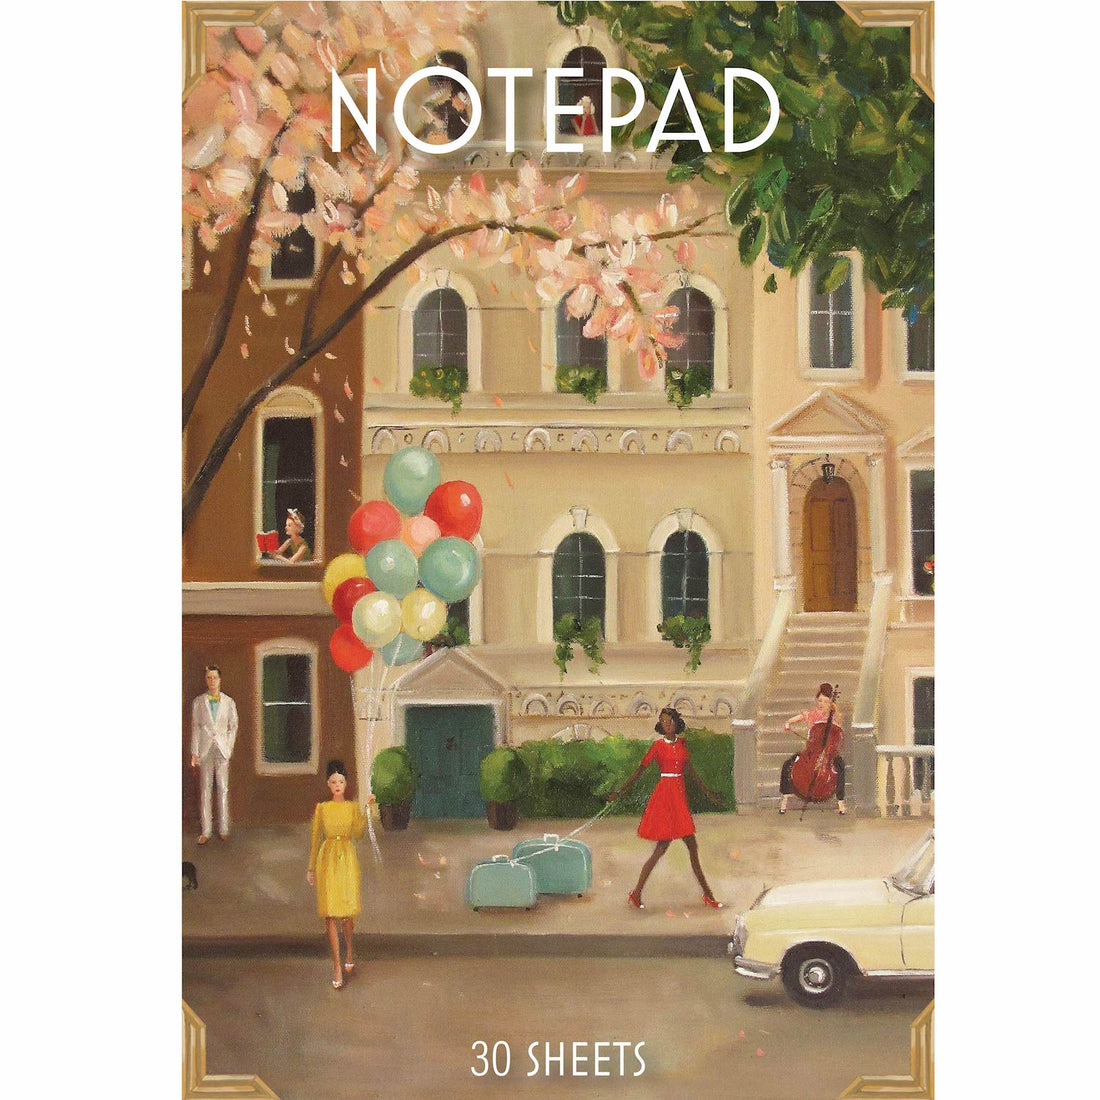 The front cover of the notepad, featuring a painterly illustration of a townhome exterior, with various vintage-dressed people on the sidewalk: a woman in a yellow dress holding balloons, a woman in a red dress pulling teal suitcases, a man in a white suit leaning on a the wall, and a lady playing a cello sitting on the stoop. The front cover says &quot;NOTEPAD&quot; across the top and &quot;30 SHEETS&quot; across the bottom, printed in white.